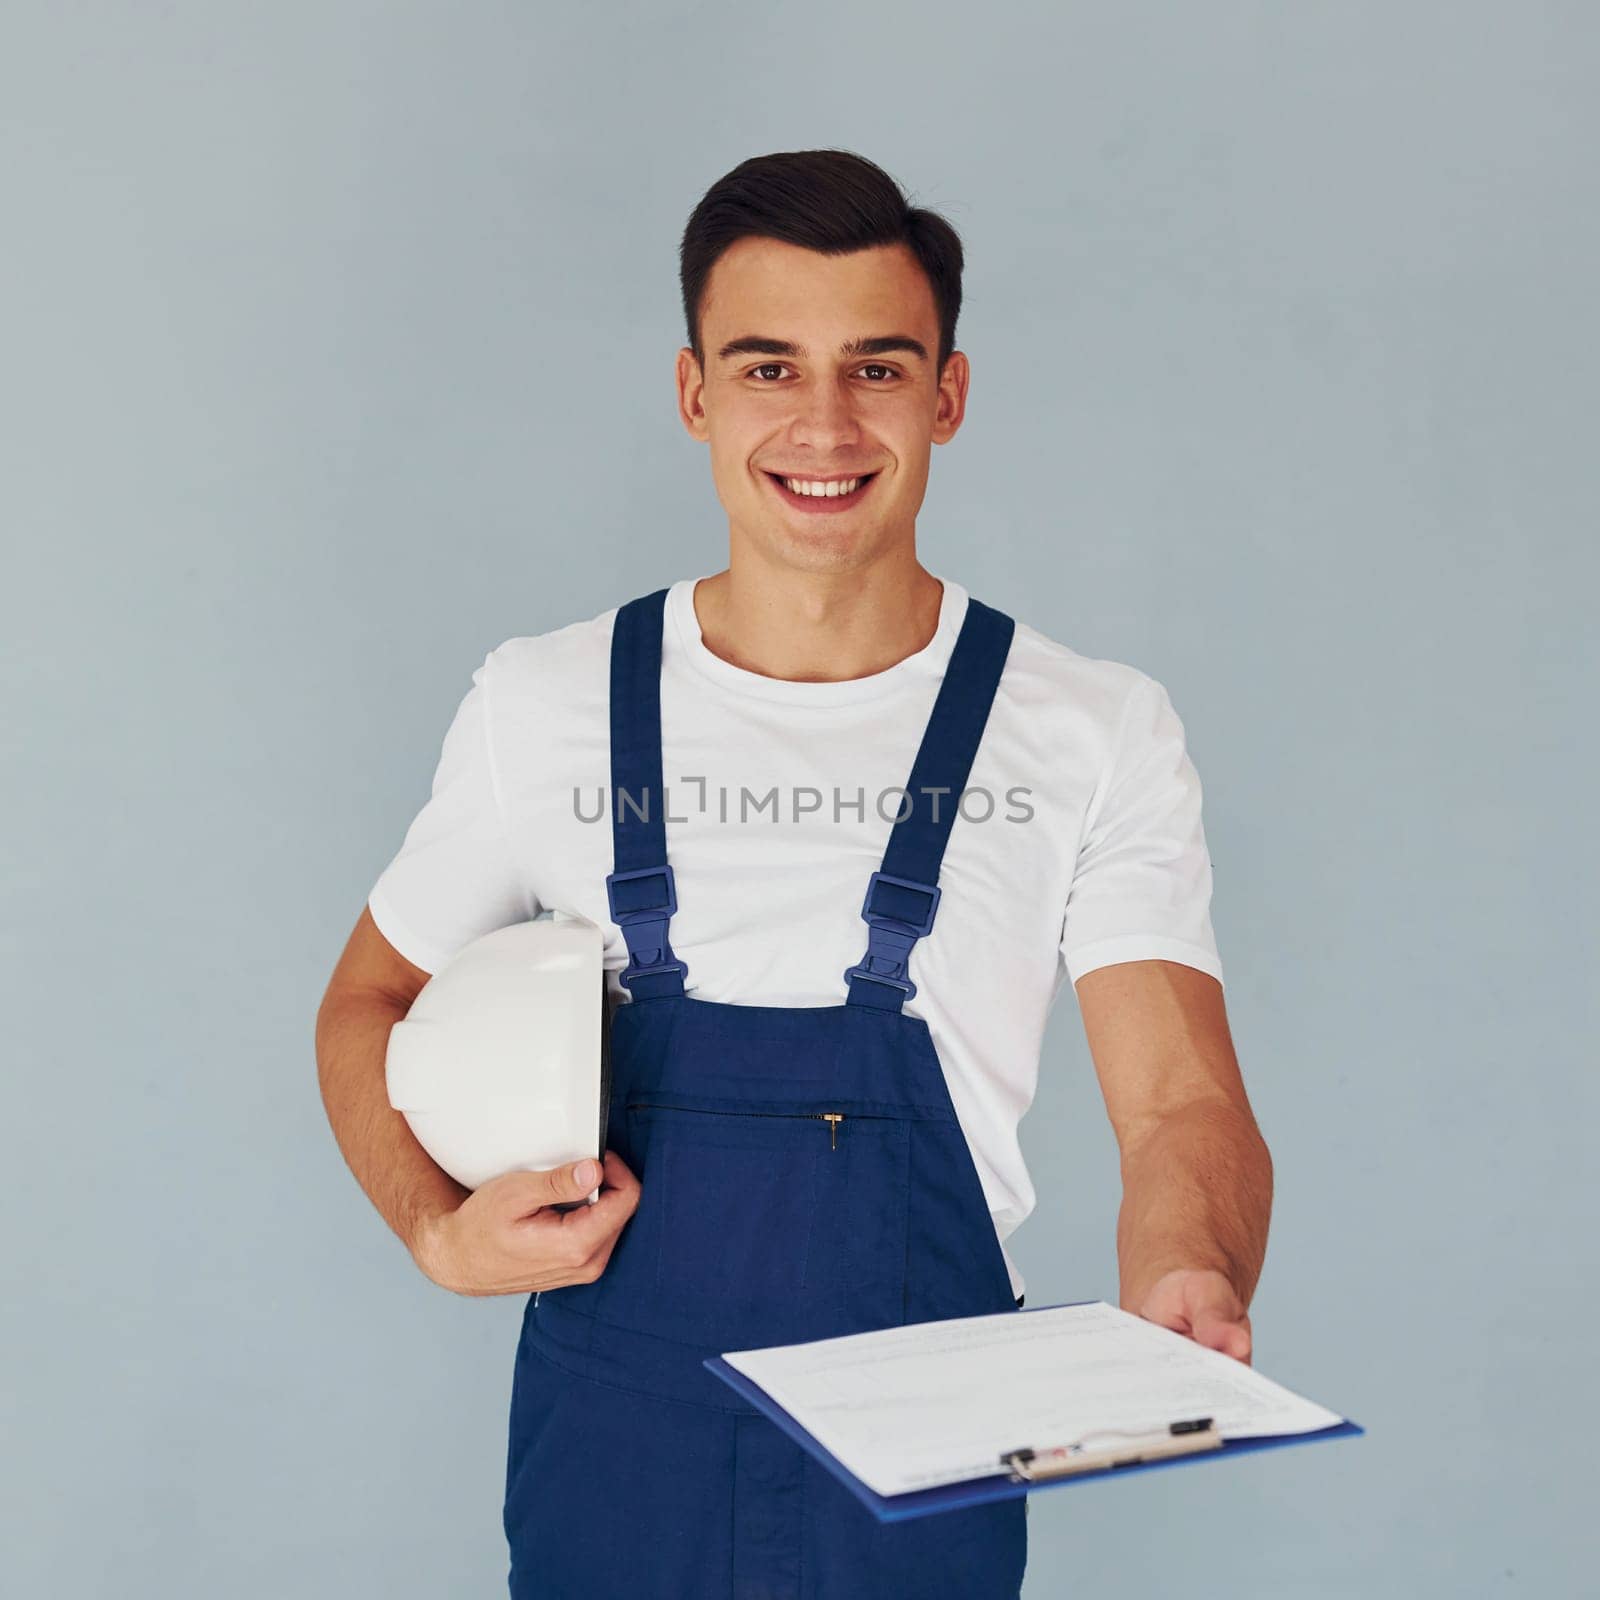 With notepad and hard hat. Male worker in blue uniform standing inside of studio against white background by Standret